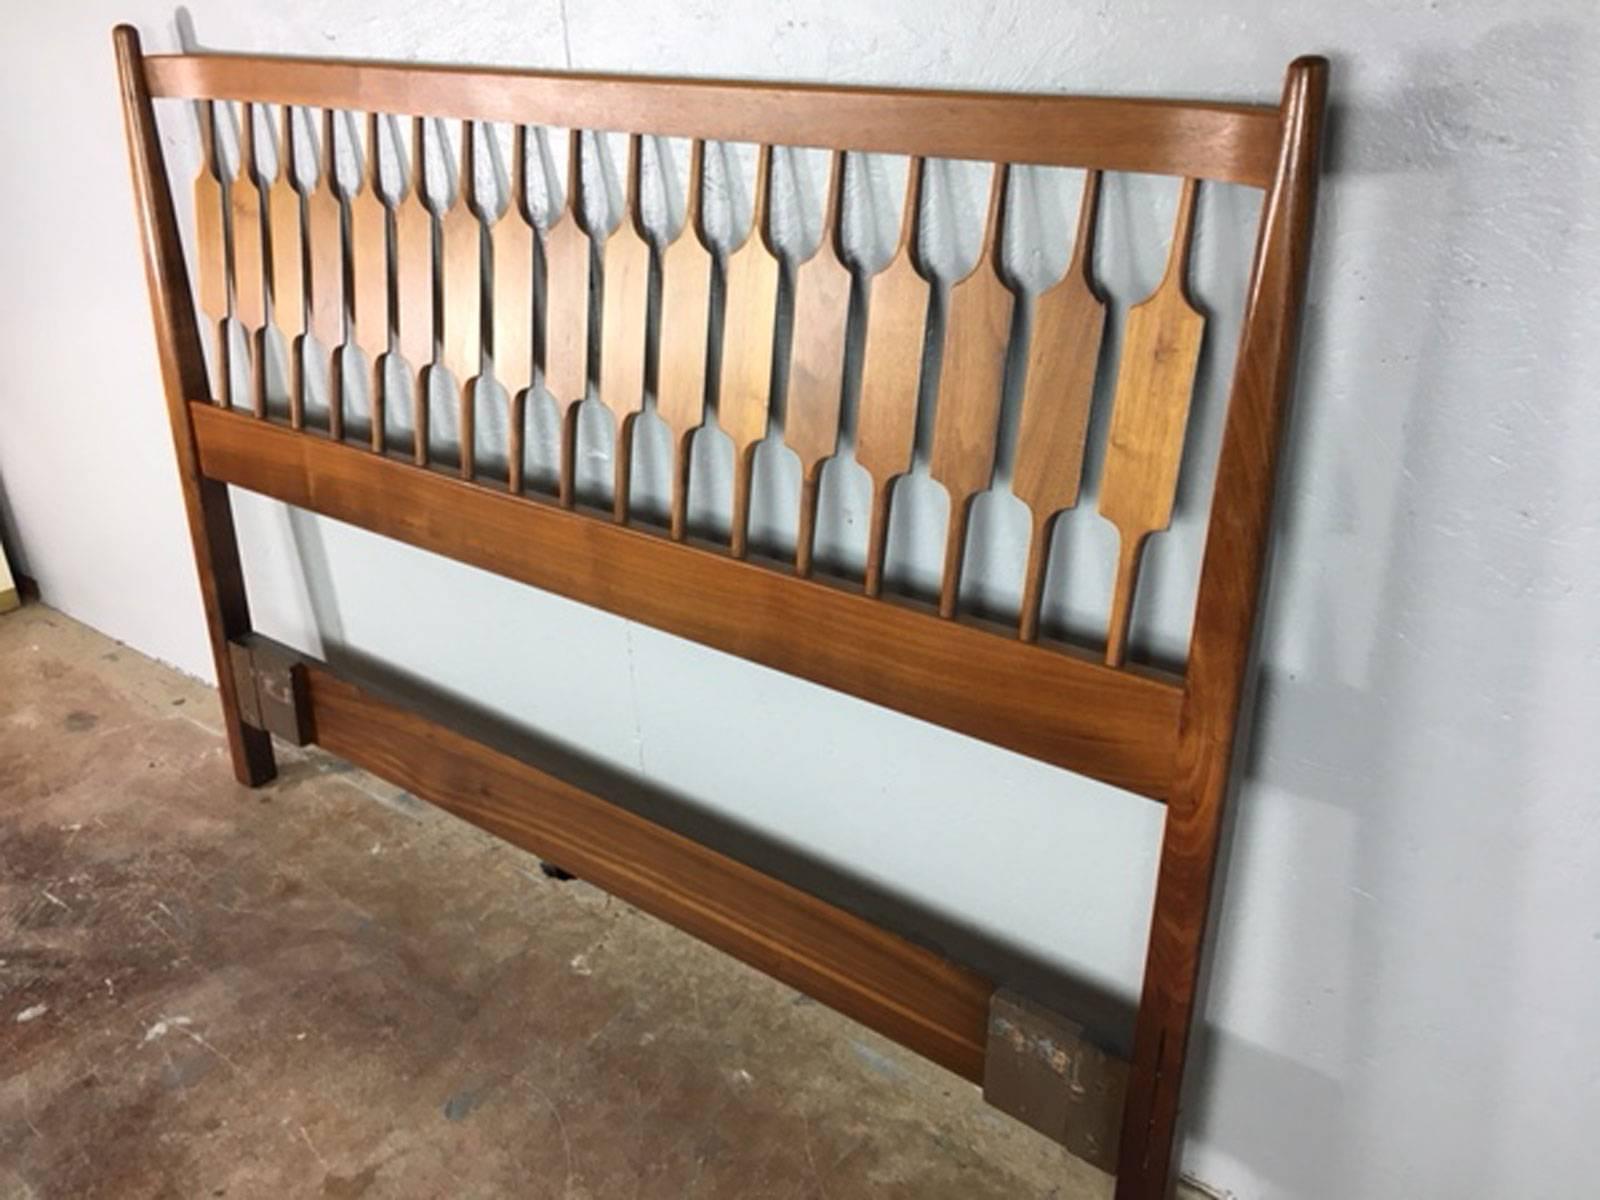 Full size headboard by Drexel in walnut. Excellent condition.